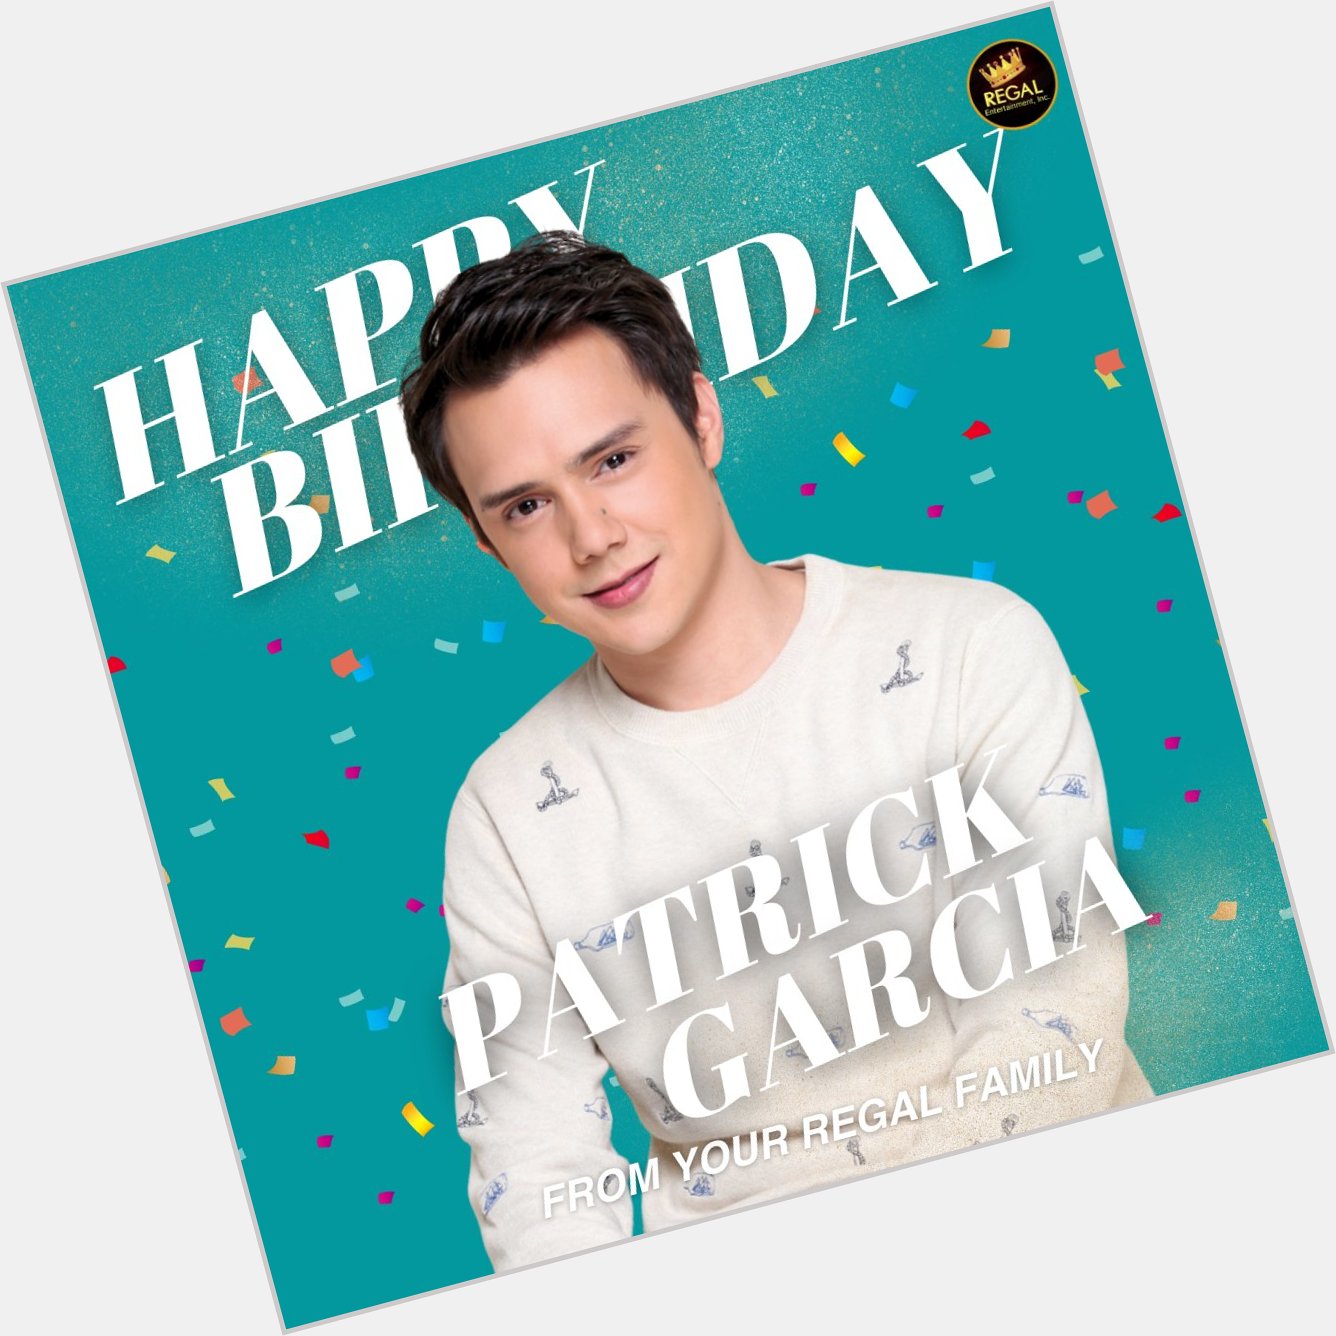 Happy Birthday, Patrick Garcia! We wish you all the best in life! From your Regal Family!  